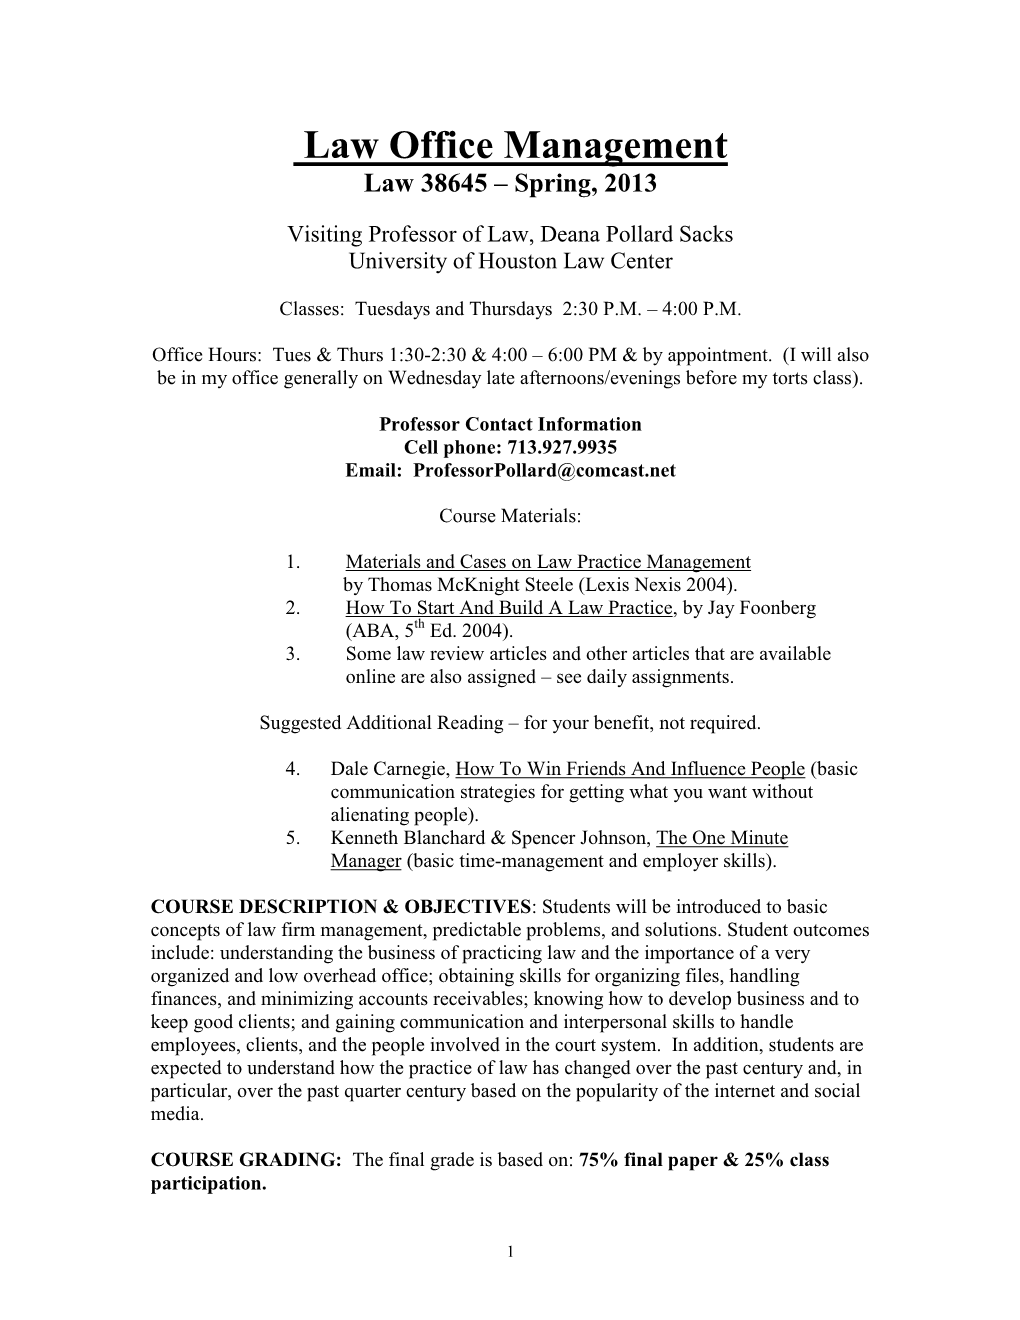 Law Office Management Law 38645 – Spring, 2013